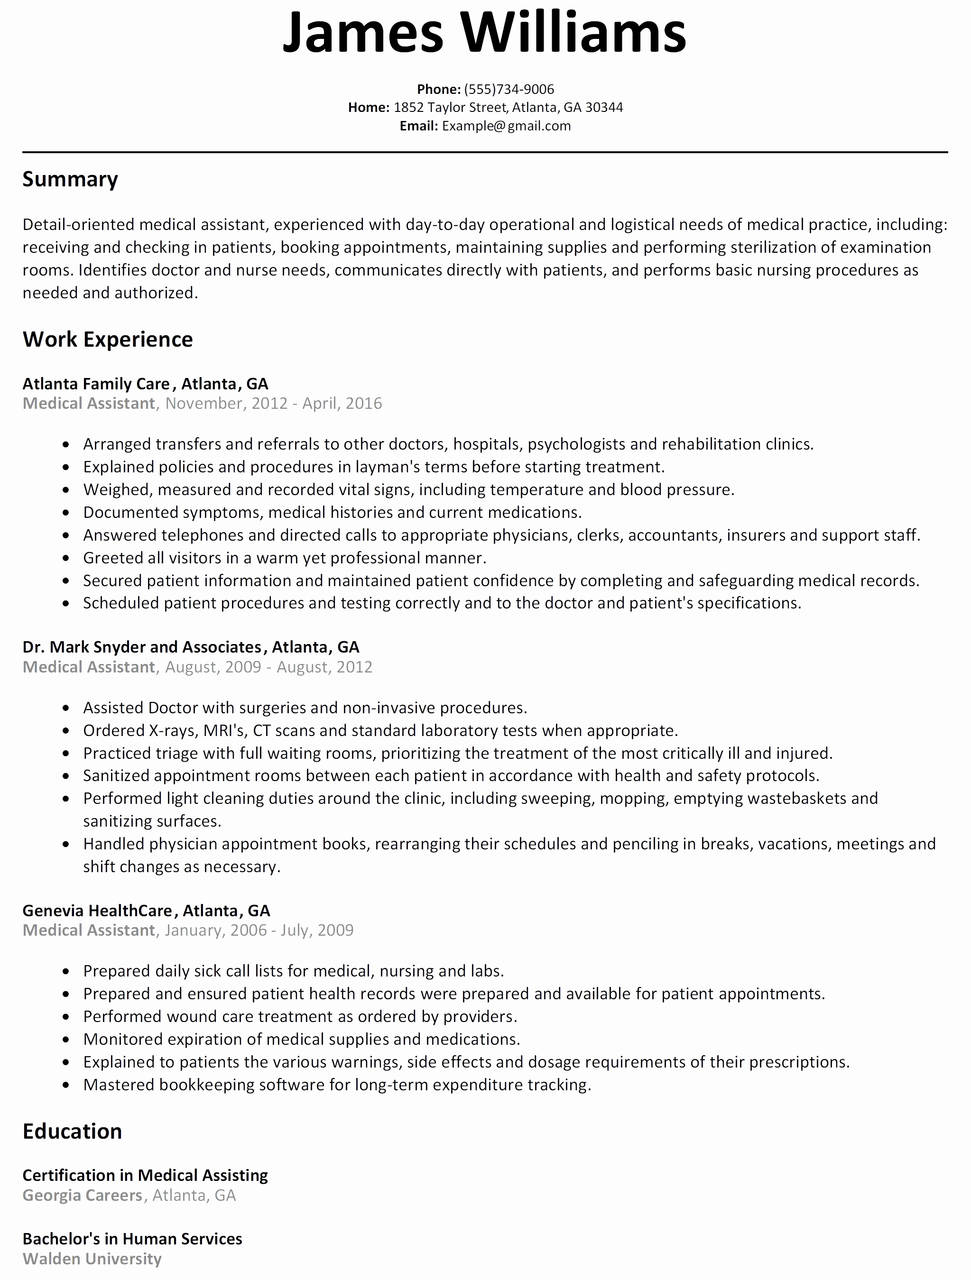 Free Resume Templates For Word Ken Coleman Resume Template free resume templates for word|wikiresume.com